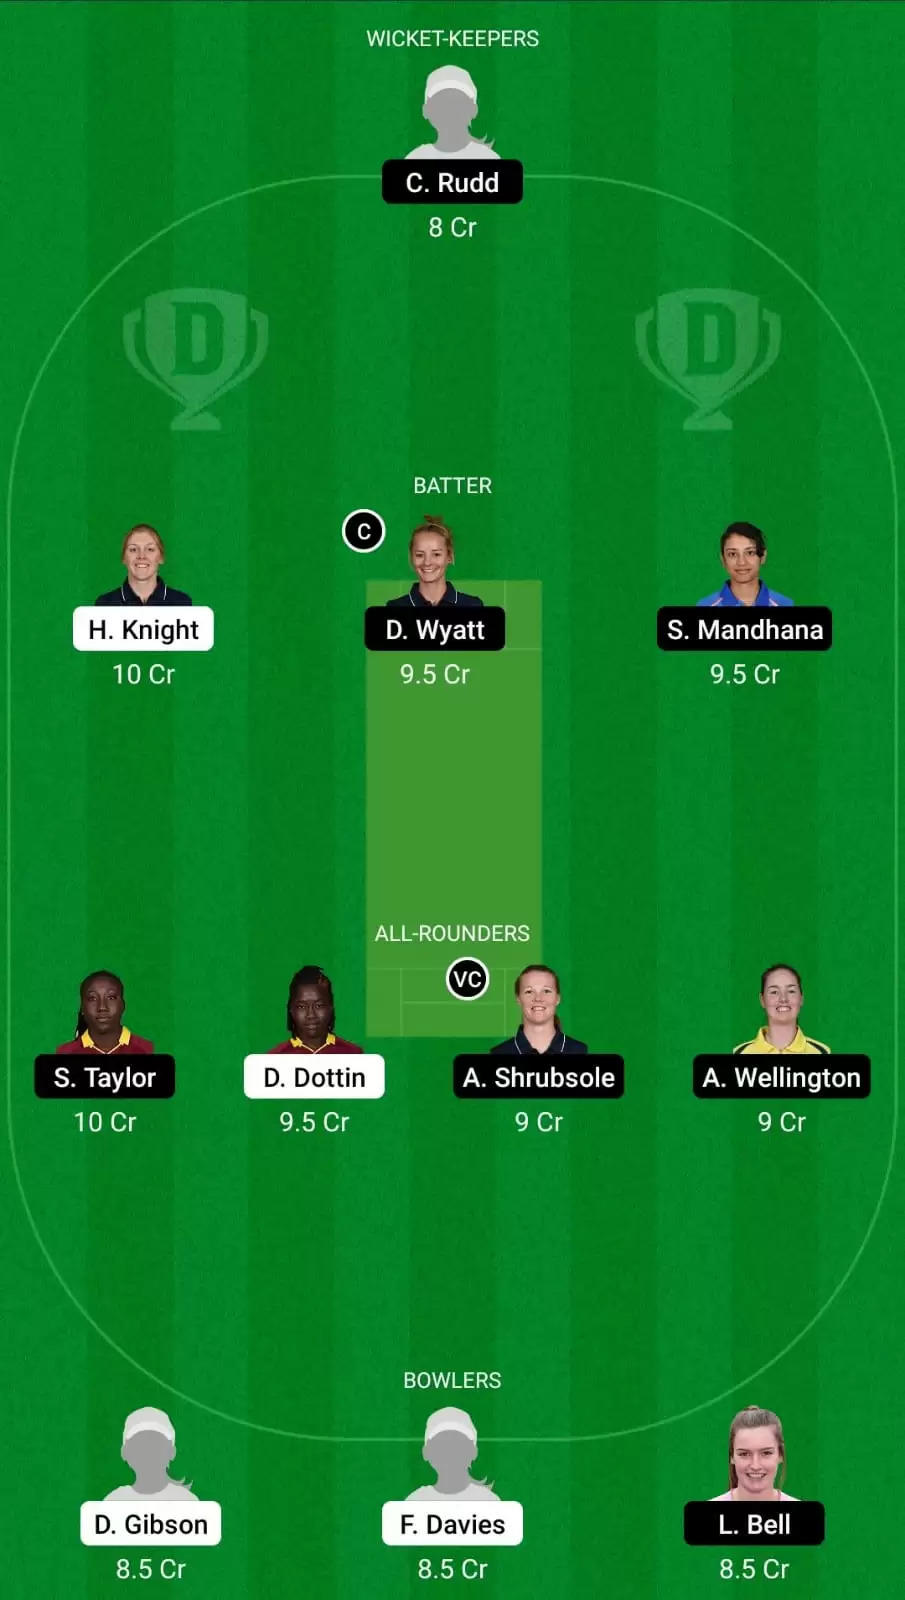 LNS-W vs SOB-W Dream11 Team Prediction for The Hundred Women’s 2021: London Spirit Women vs Southern Brave Women Best Fantasy Cricket Tips, Strongest Playing XI, Pitch Report and Player Updates